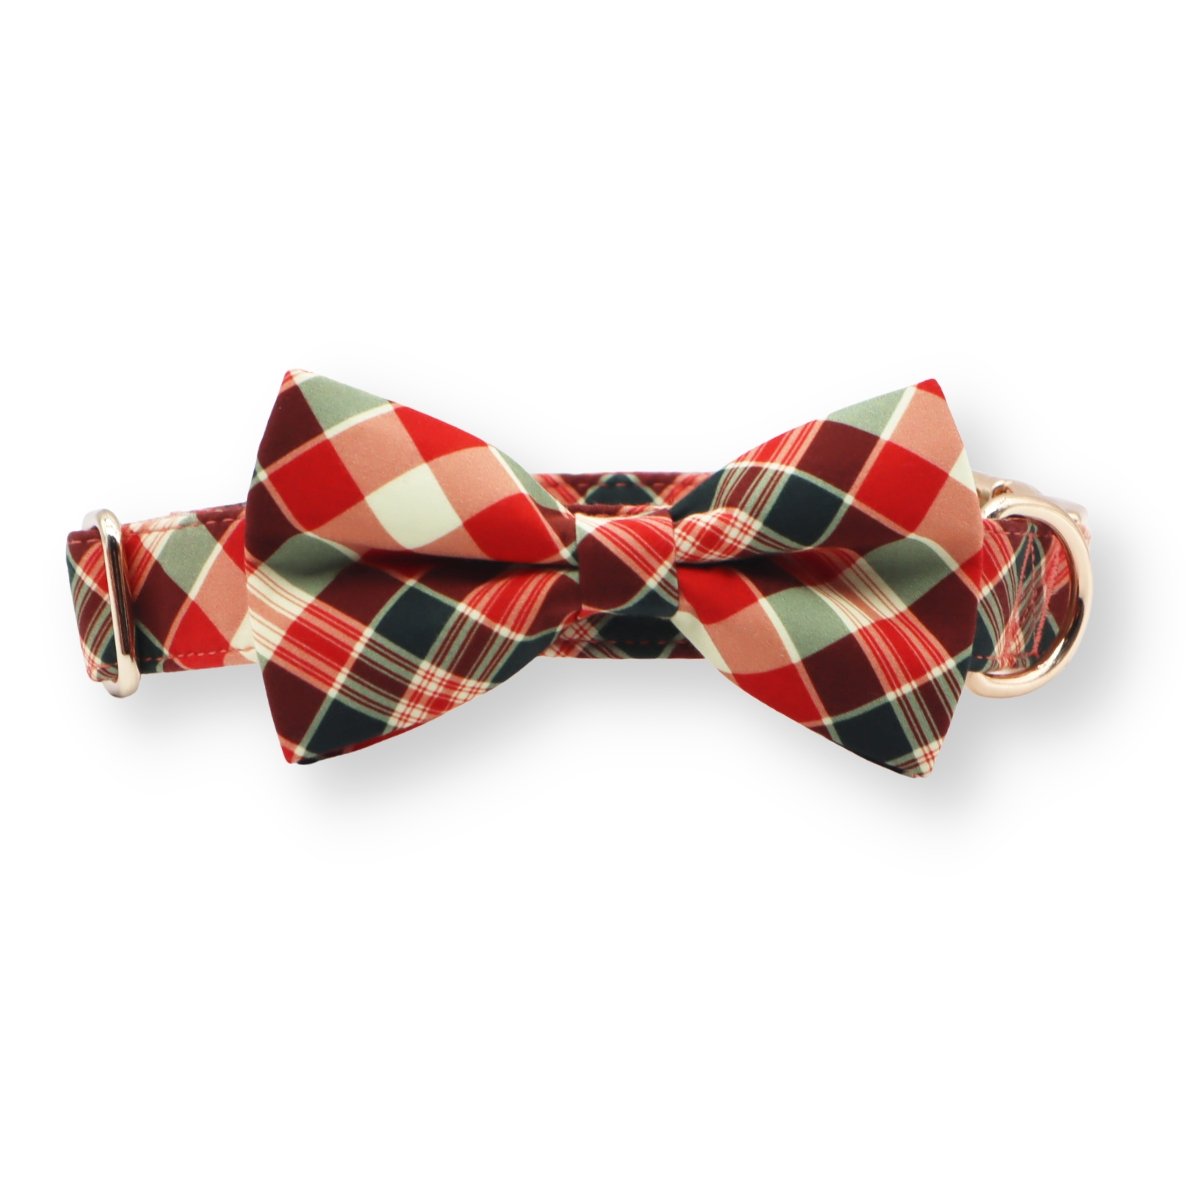 KUDES Plaid Dog Collar with Bow, 2 Pack/Set Adjustable Cute Dog Bow Tie  Collars with Bell, Best Pet Gift for Small Medium Large Boy Male Dogs,  Beige 